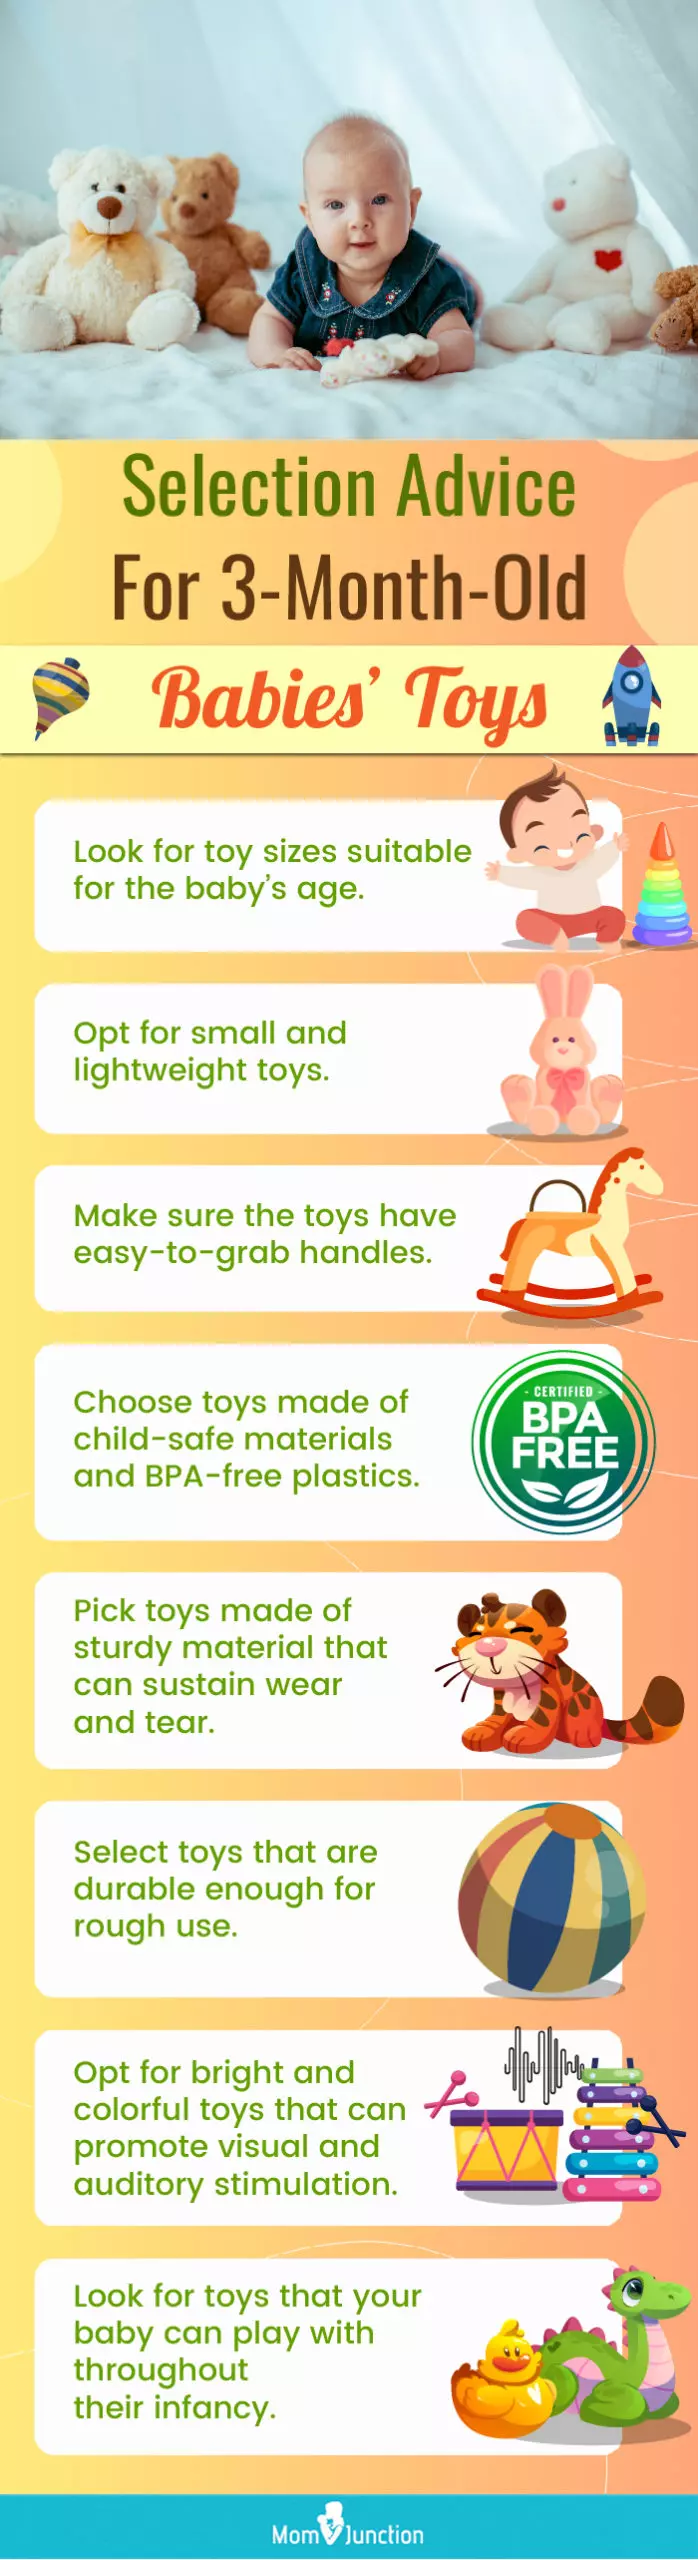 Selection Advice For 3-Month-Old Babies’ Toys (infographic)